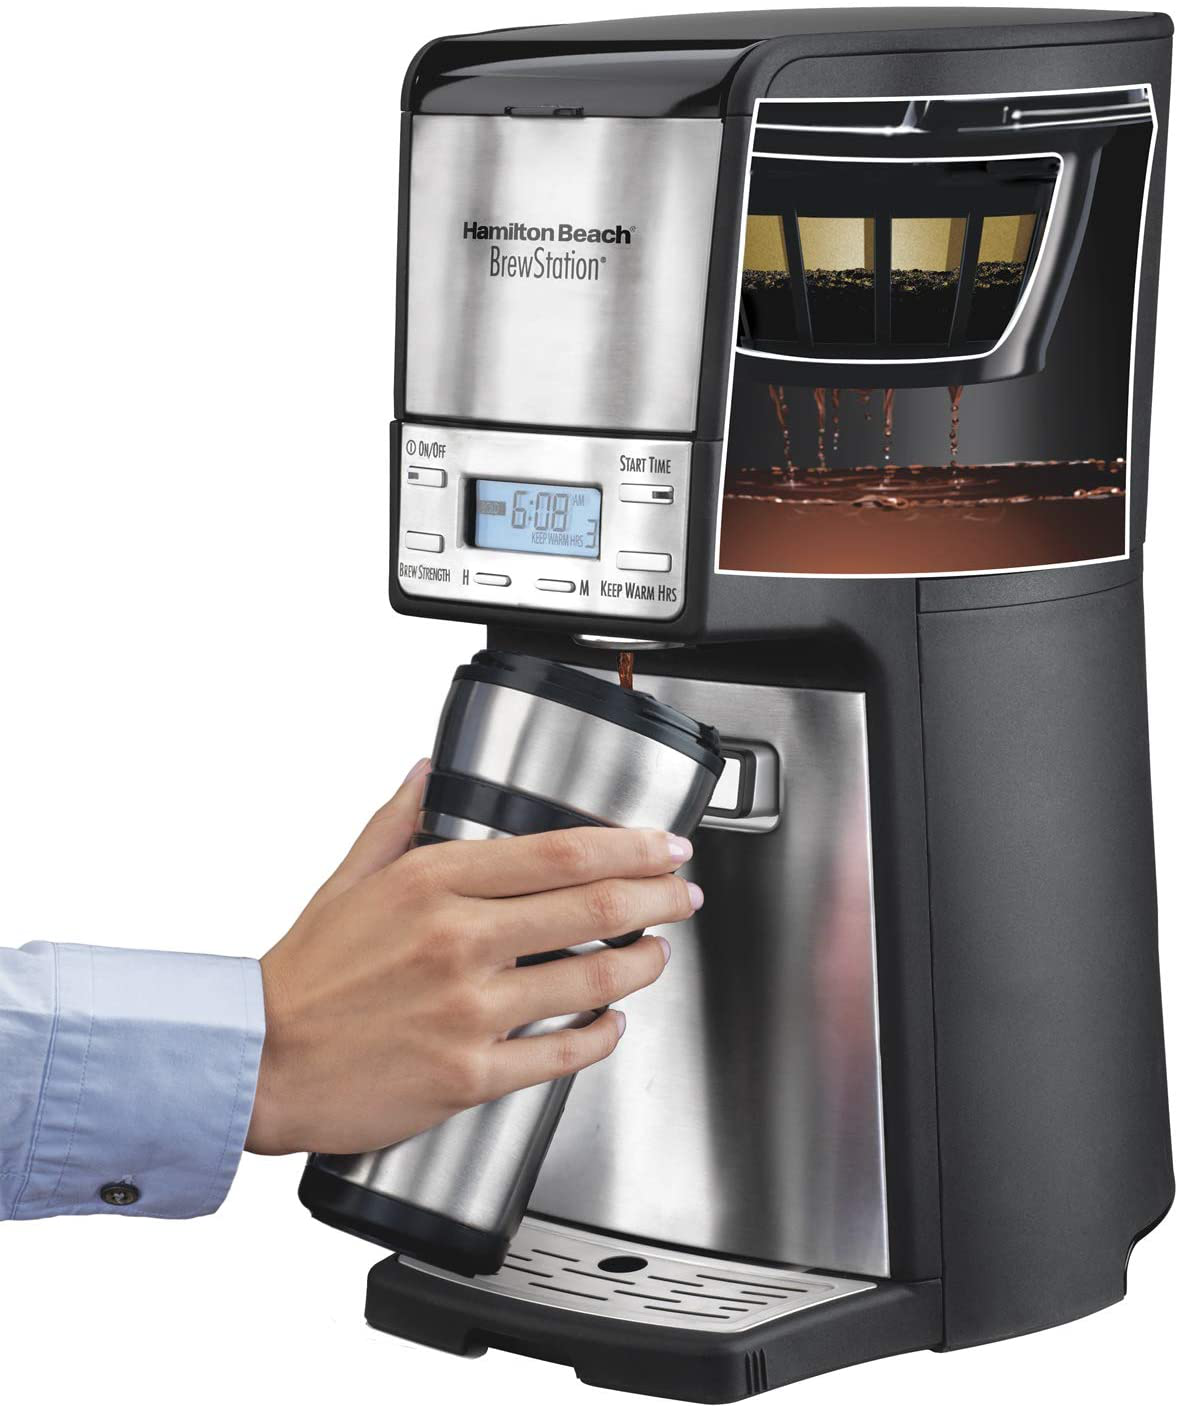 Hamilton Beach (48465) Coffee Maker with 12 Cup Capacity & Internal Storage Coffee Pot, Brewstation, Black & Stainless